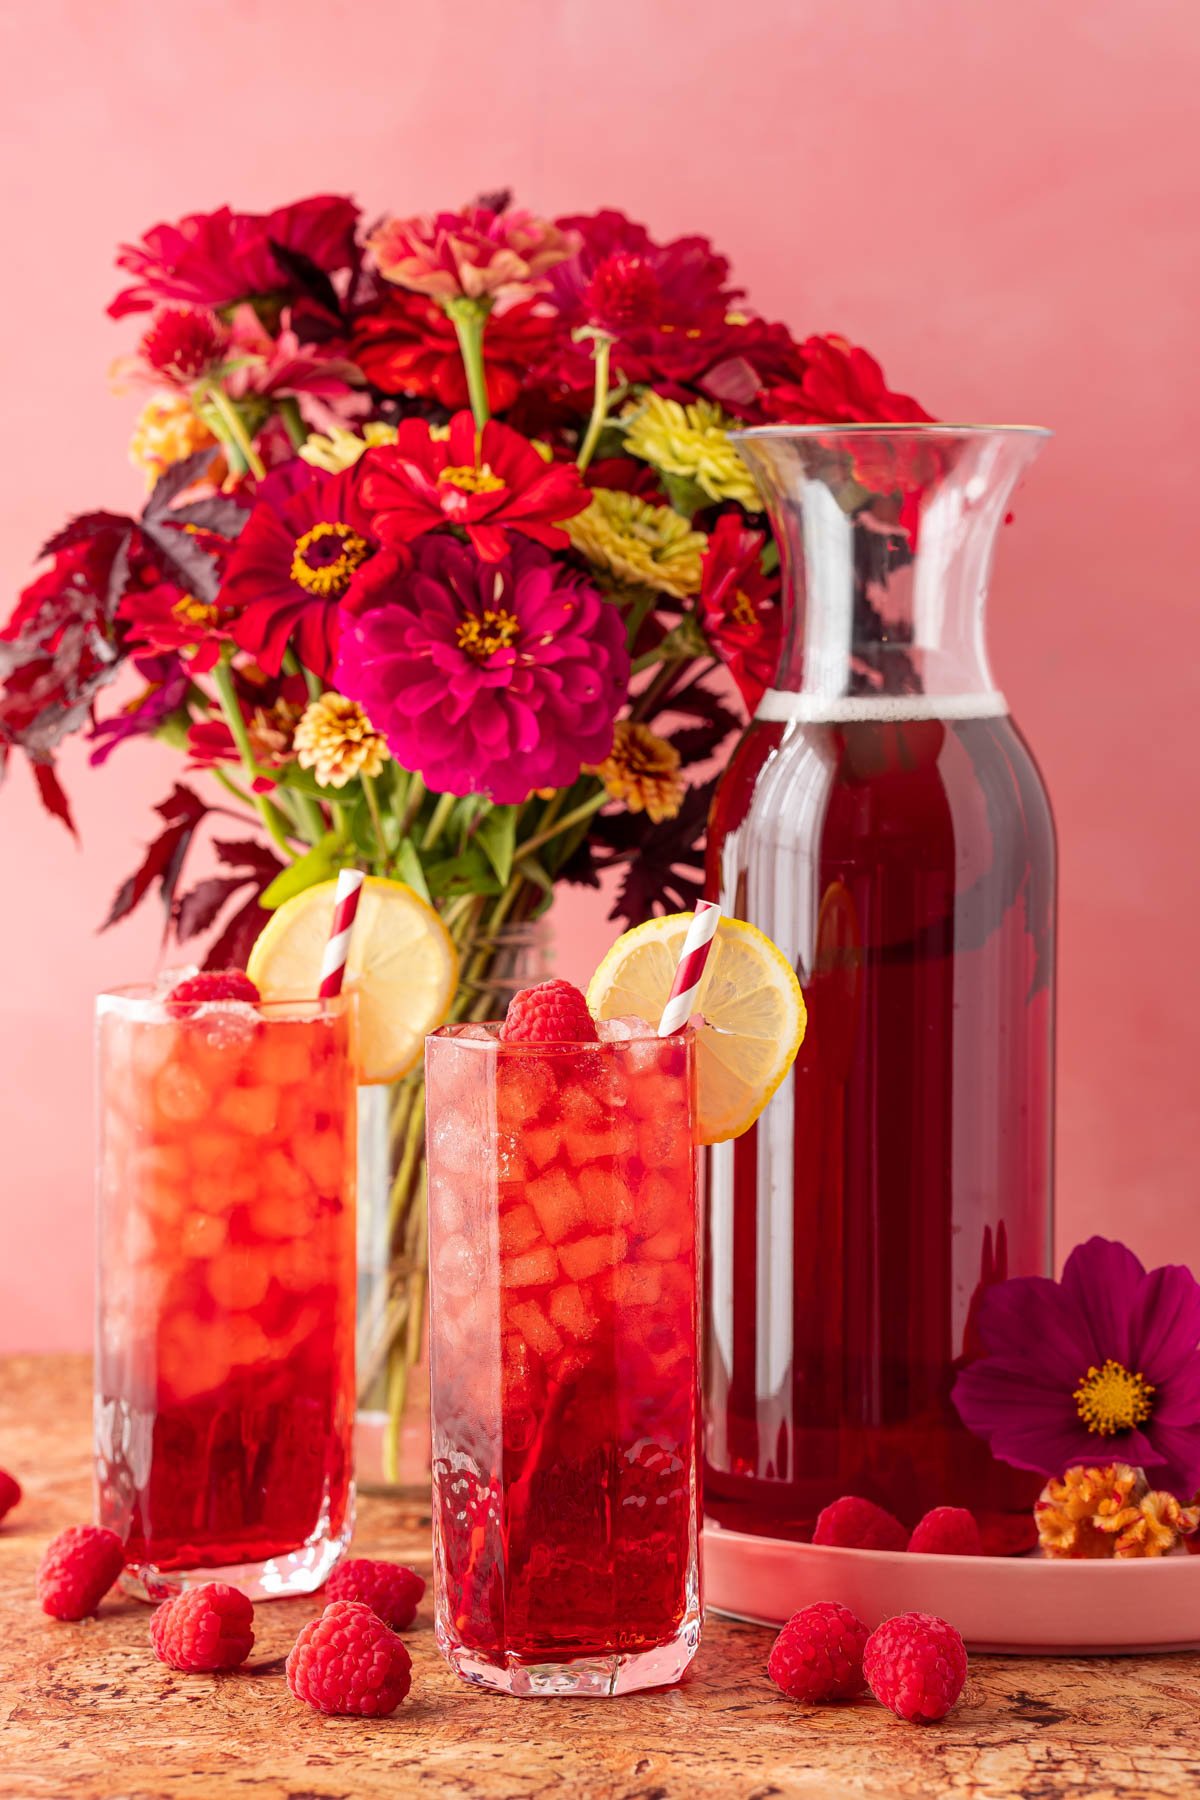 Glasses of raspberry iced tea on a table with a pitcher of tea and a vase of flowers.